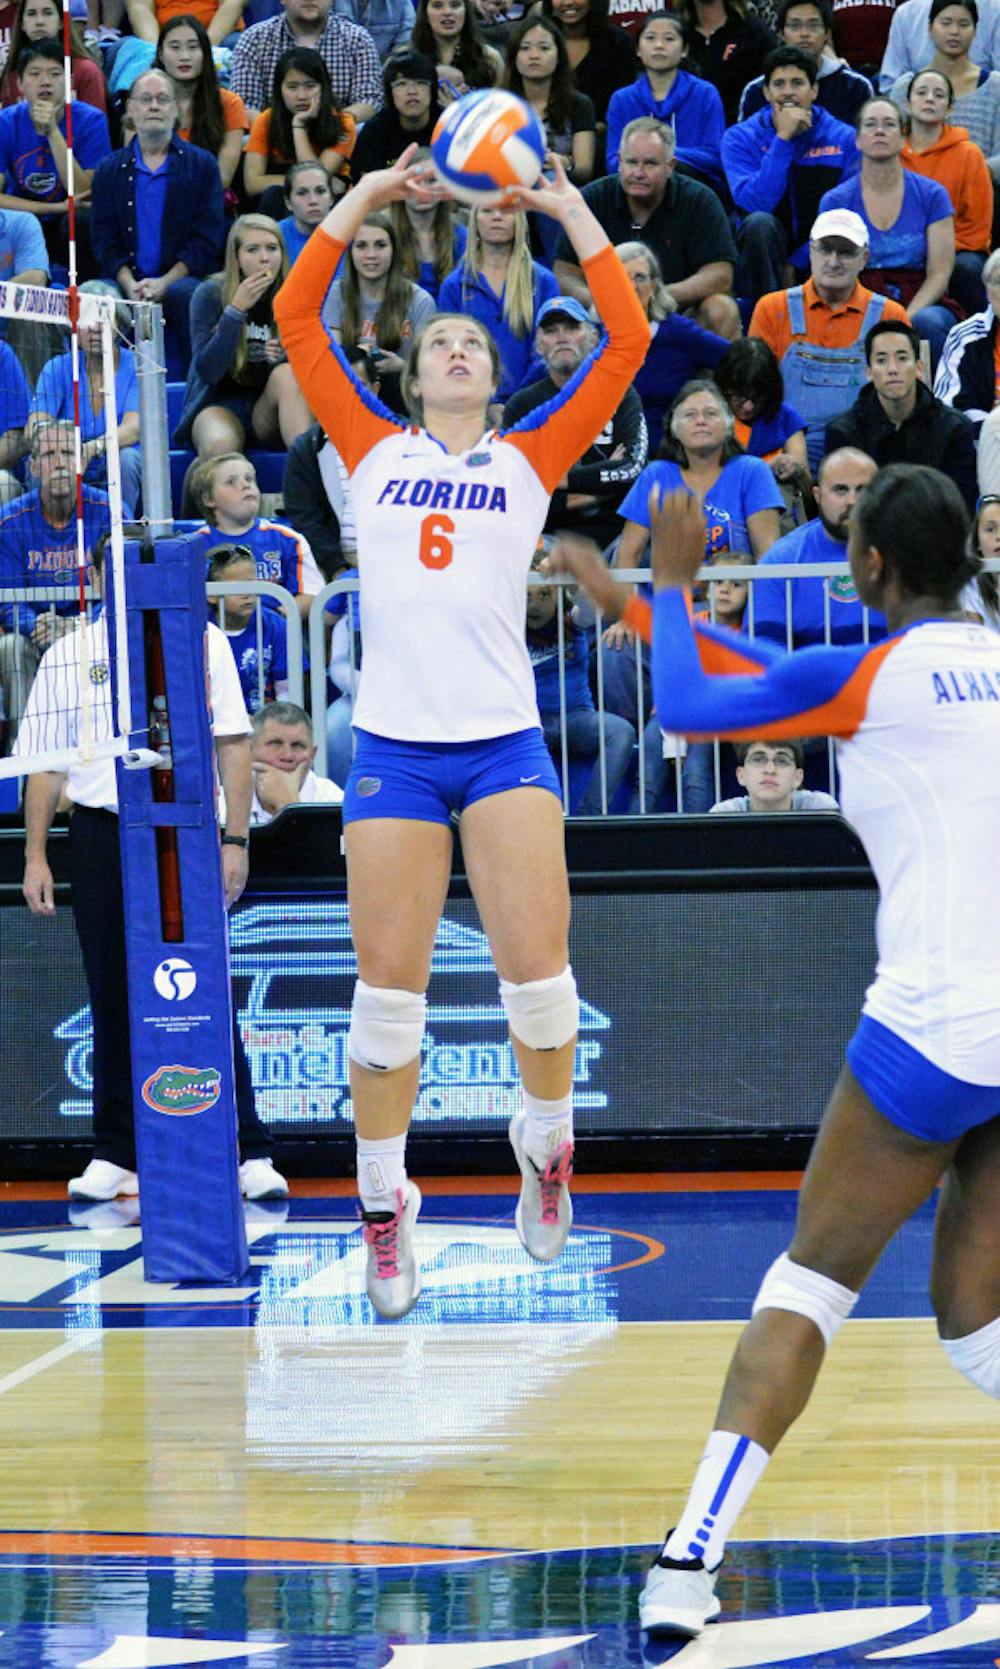 <p>Mackenzie Dagostino sets the ball during Florida's 3-0 win against Alabama on Friday in the O'Connell Center.</p>